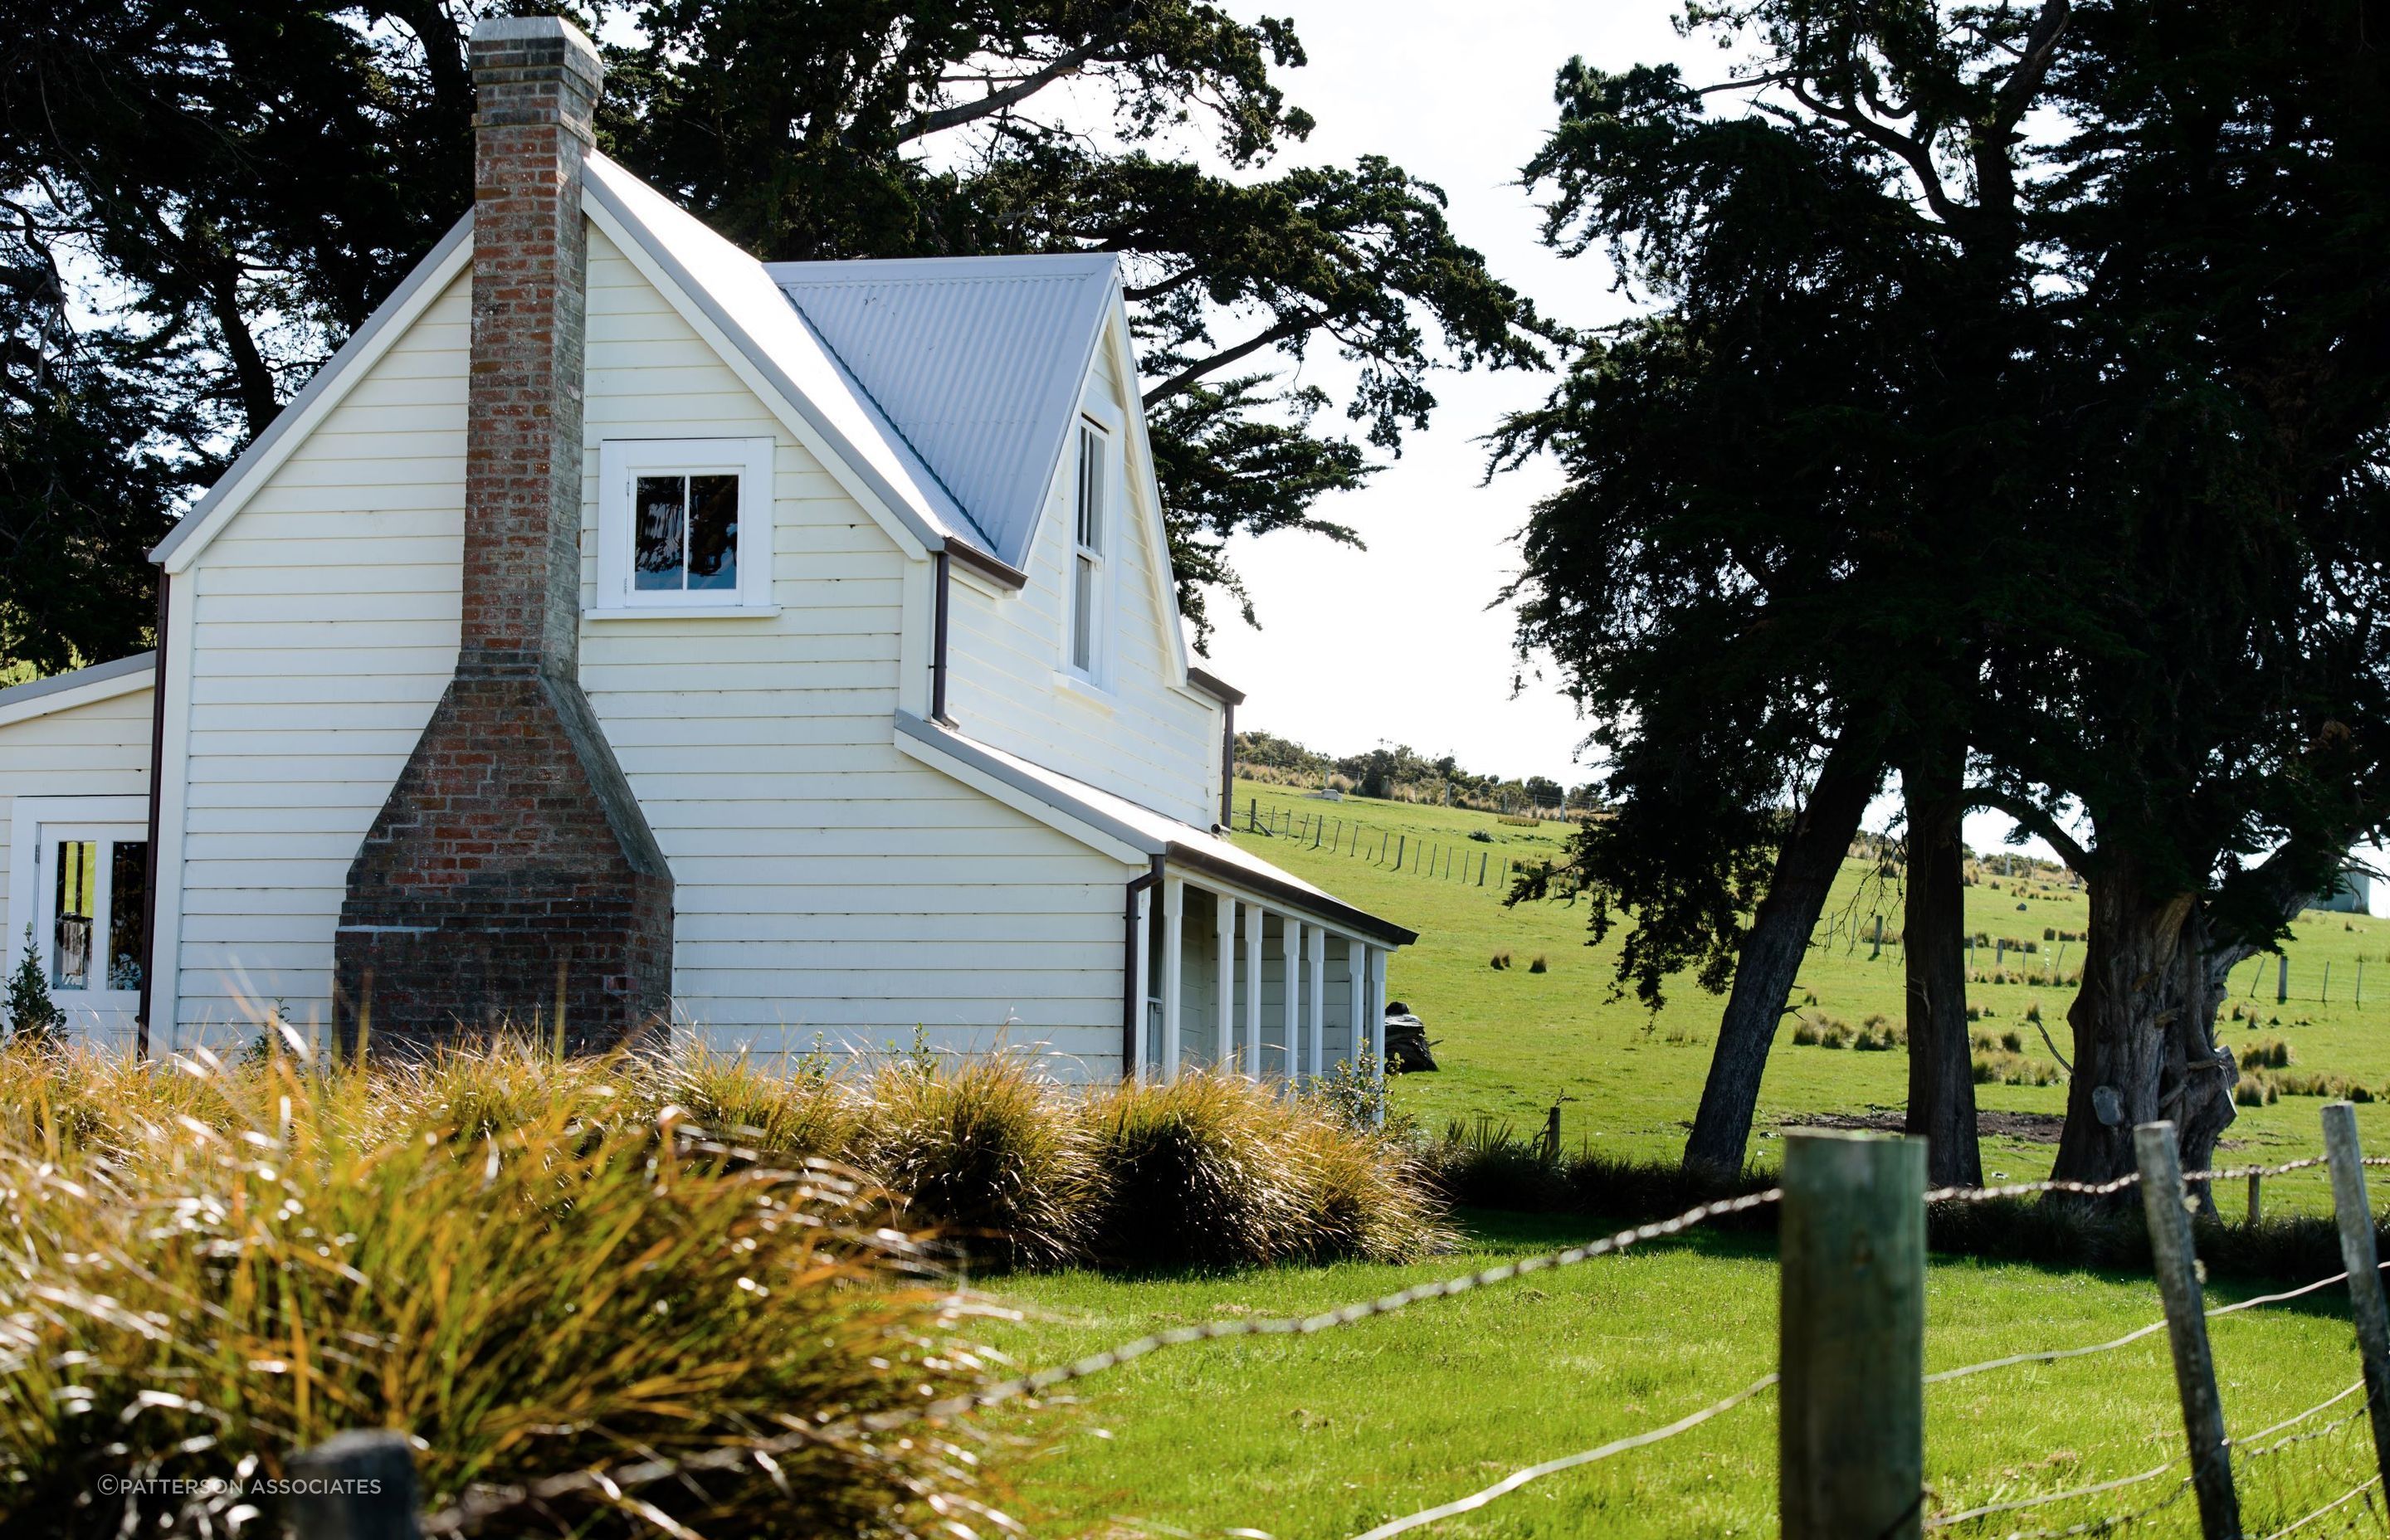 A picturesque view of the Shepherds Cottage of Annandale, originally an outlying workman’s hut built in 1878.